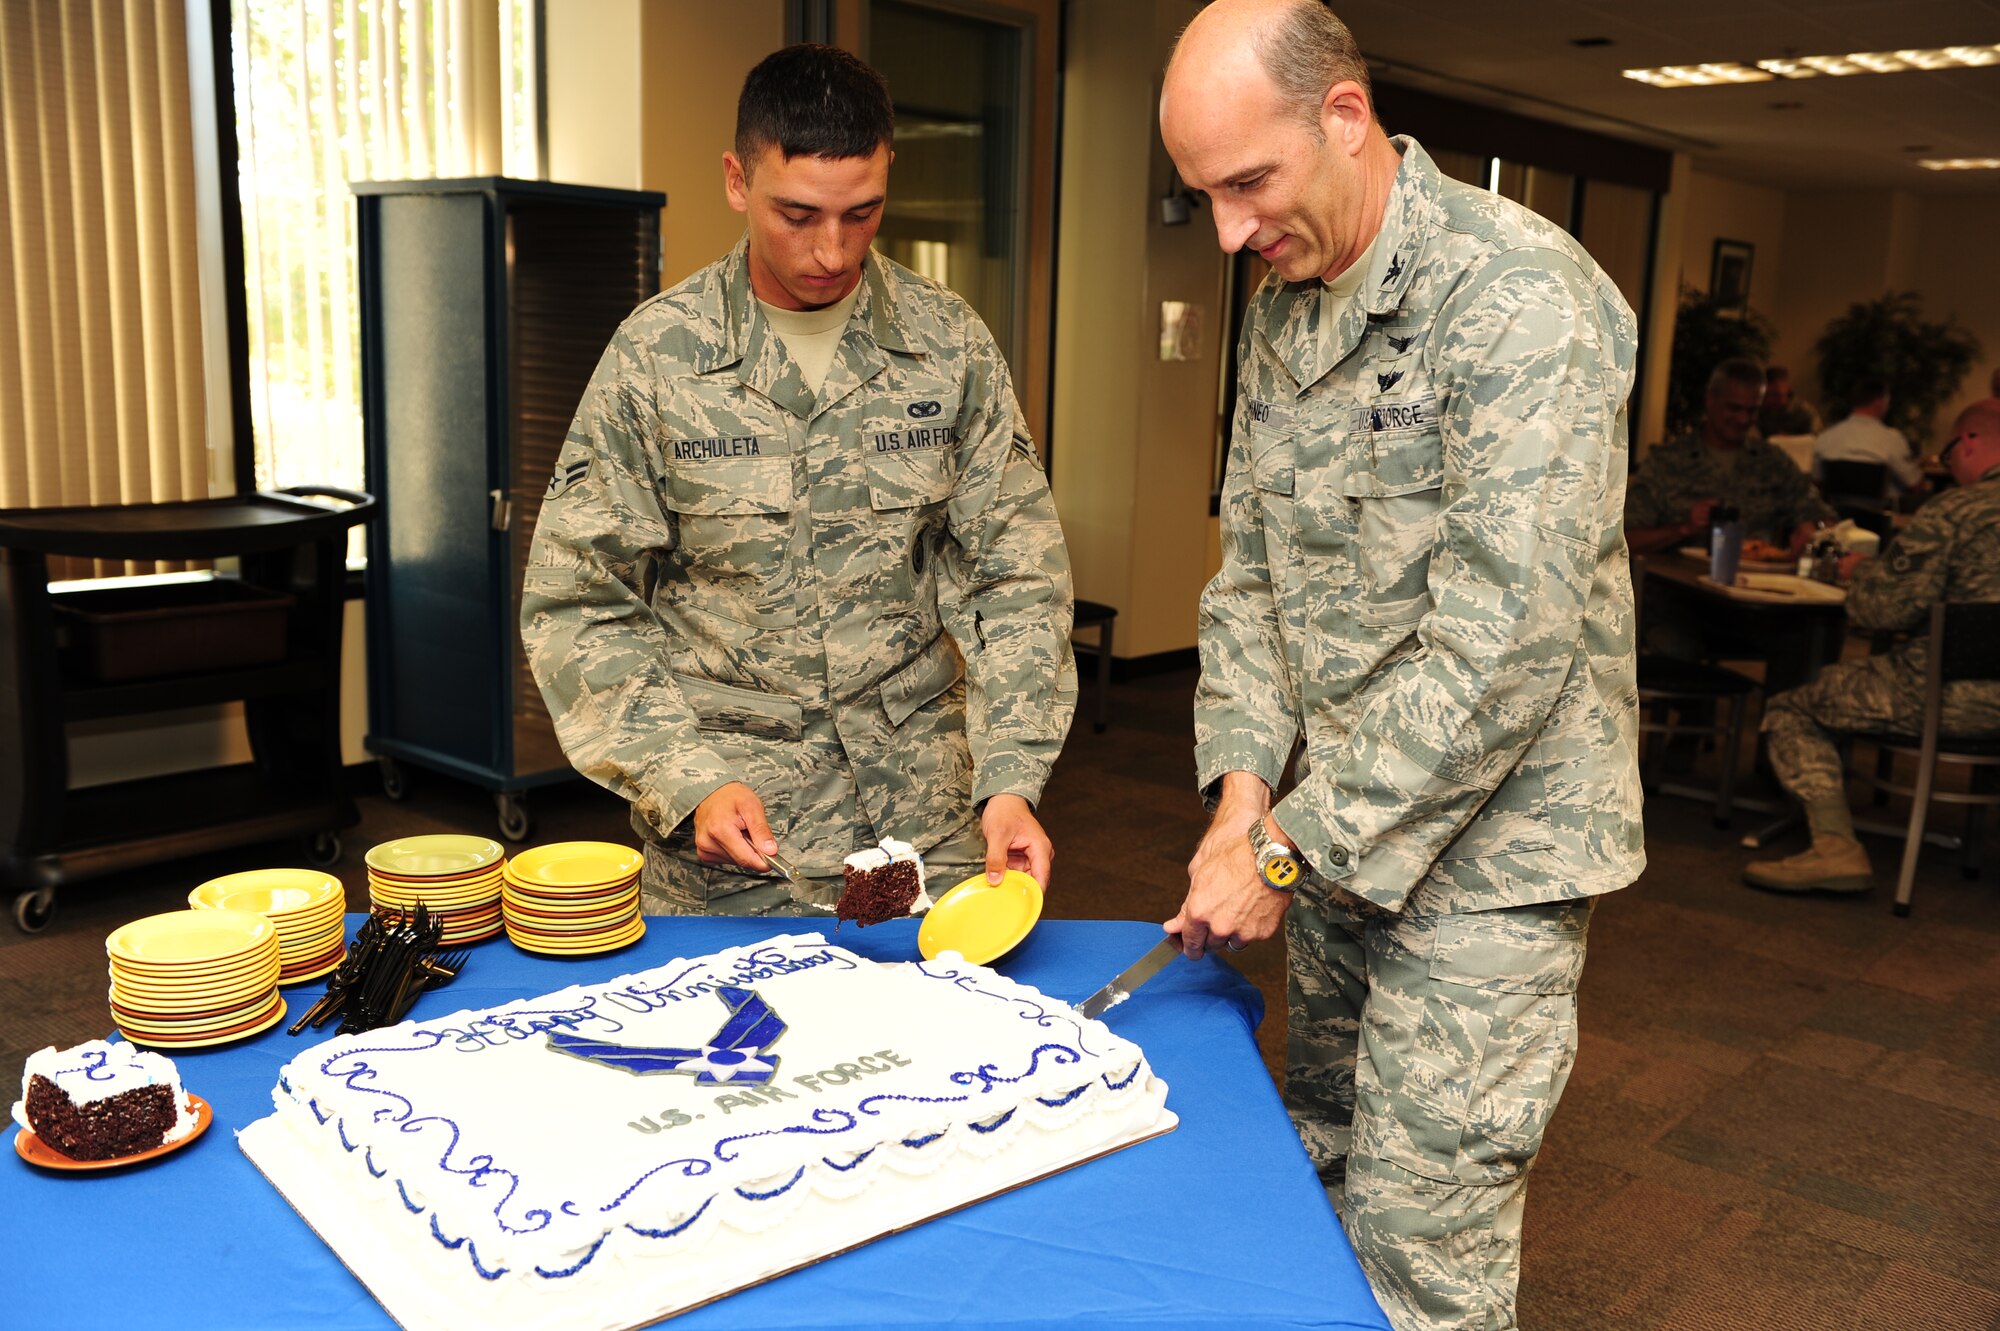 U.S. Air Force Col. Jeffrey T. Mineo and U.S. Air Force Airman 1st Class Abram Archuleta, the youngest Airman in the 310th Space Wing, celebrate the Air Force's birthday, as well as the anniversaries of Air Force Space Command and the 310th Space Wing, with a cake cutting ceremony on Schriever Air Force Base, Colo., Sept. 8. (U.S. Air Force photo by Tech. Sgt. Nicholas B. Ontiveros/Released)